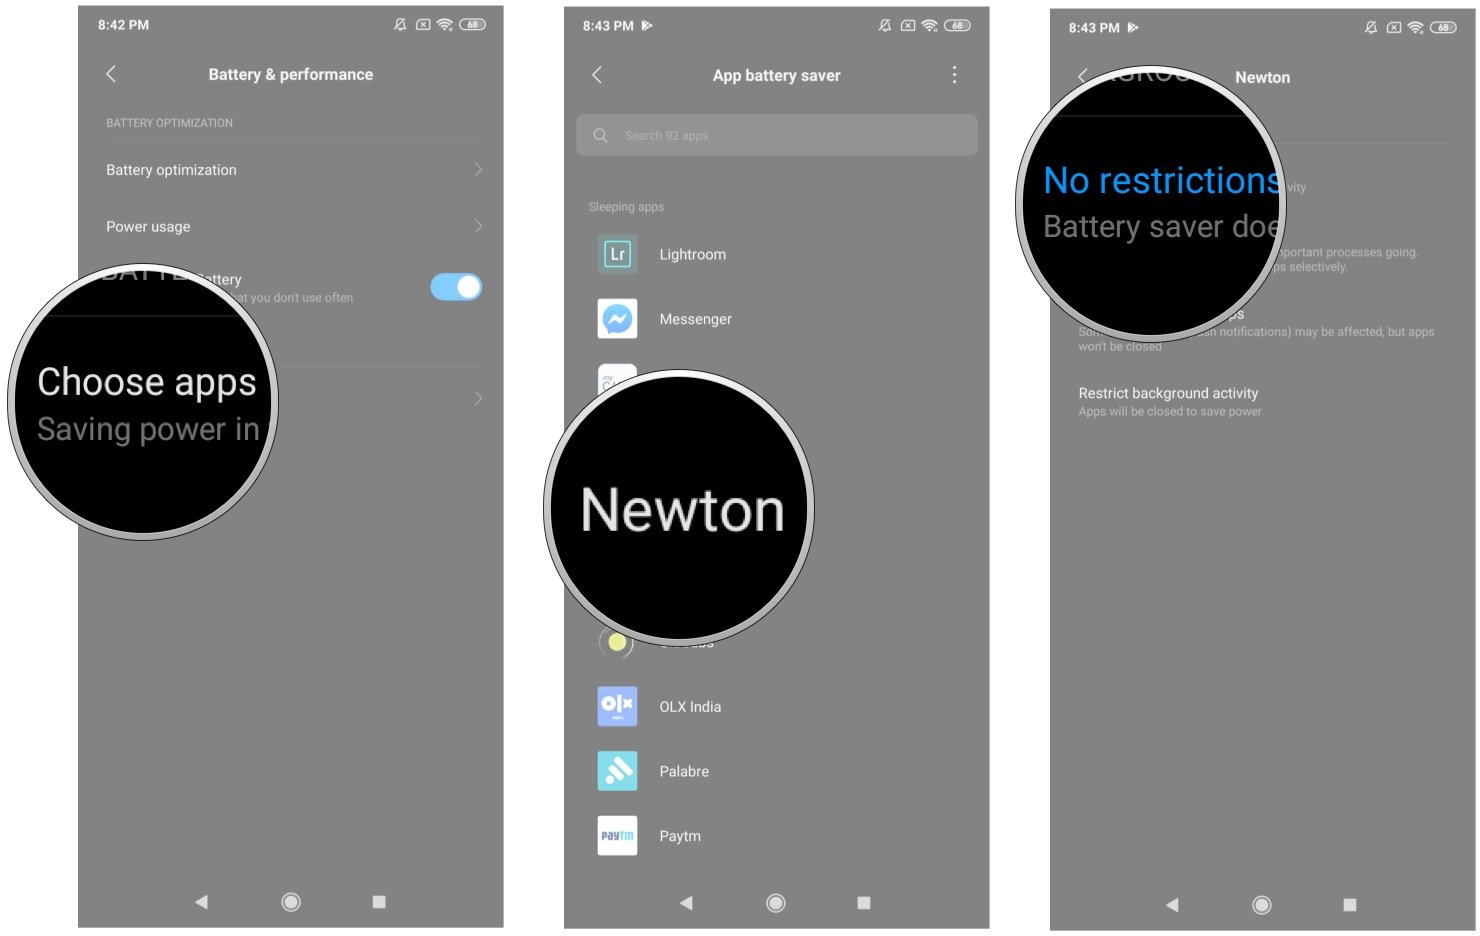 How to fix push notifications in MIUI